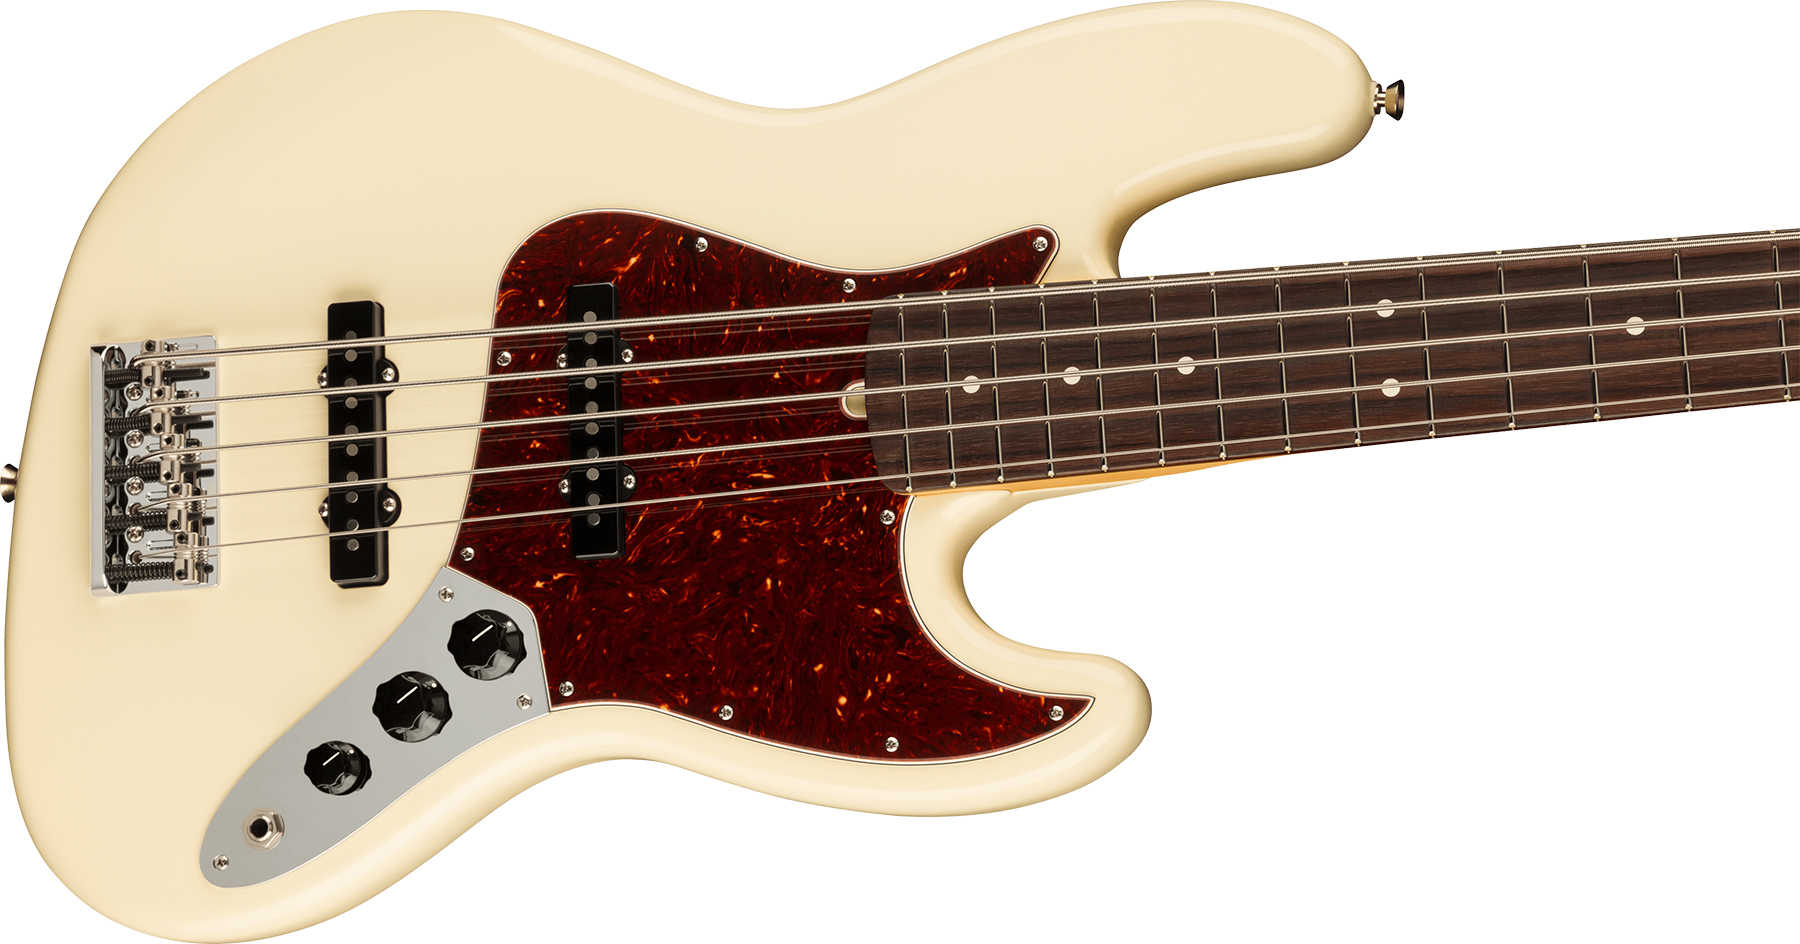 Fender Jazz Bass V American Professional Ii Usa 5-cordes Rw - Olympic White - Basse Électrique Solid Body - Variation 2